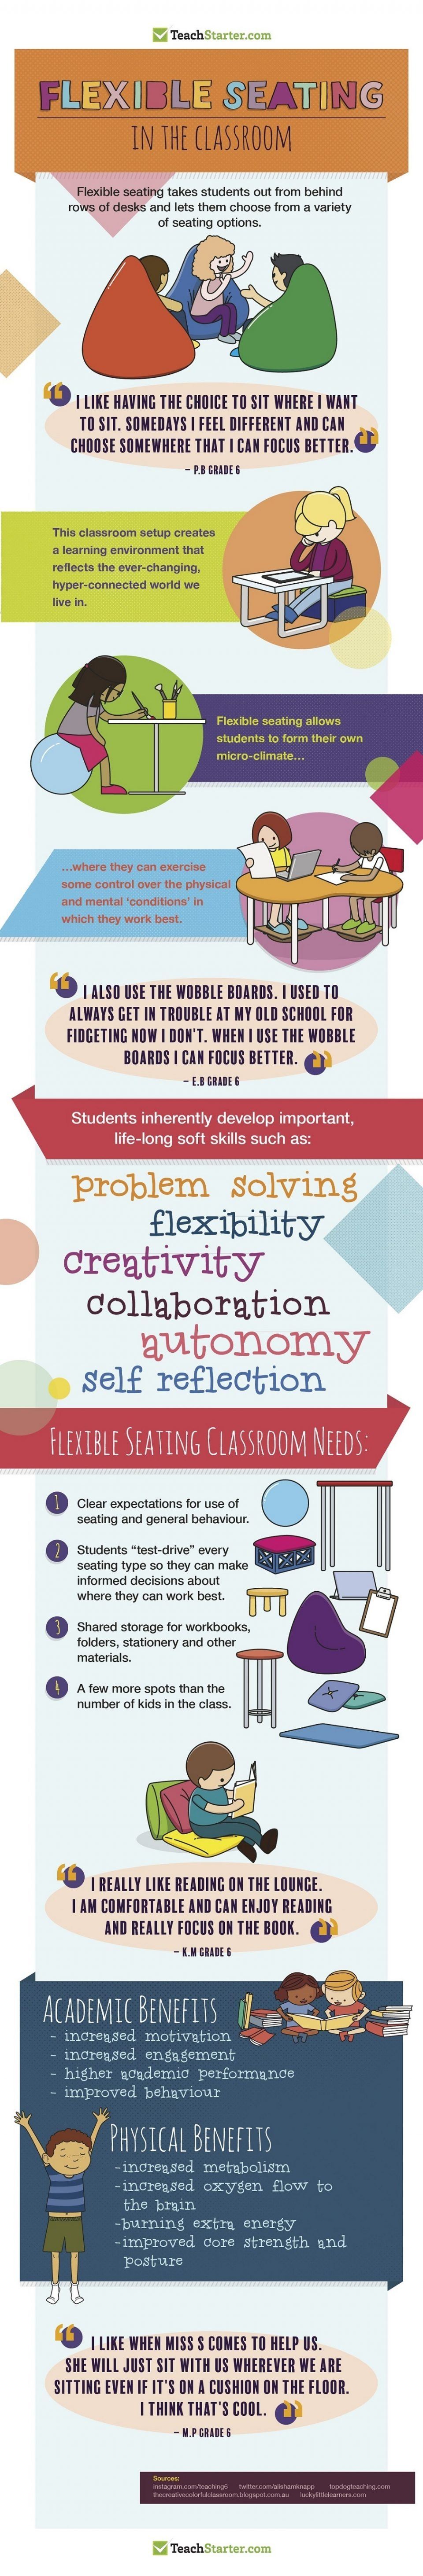 Flexible Seating in the Classroom Infographic